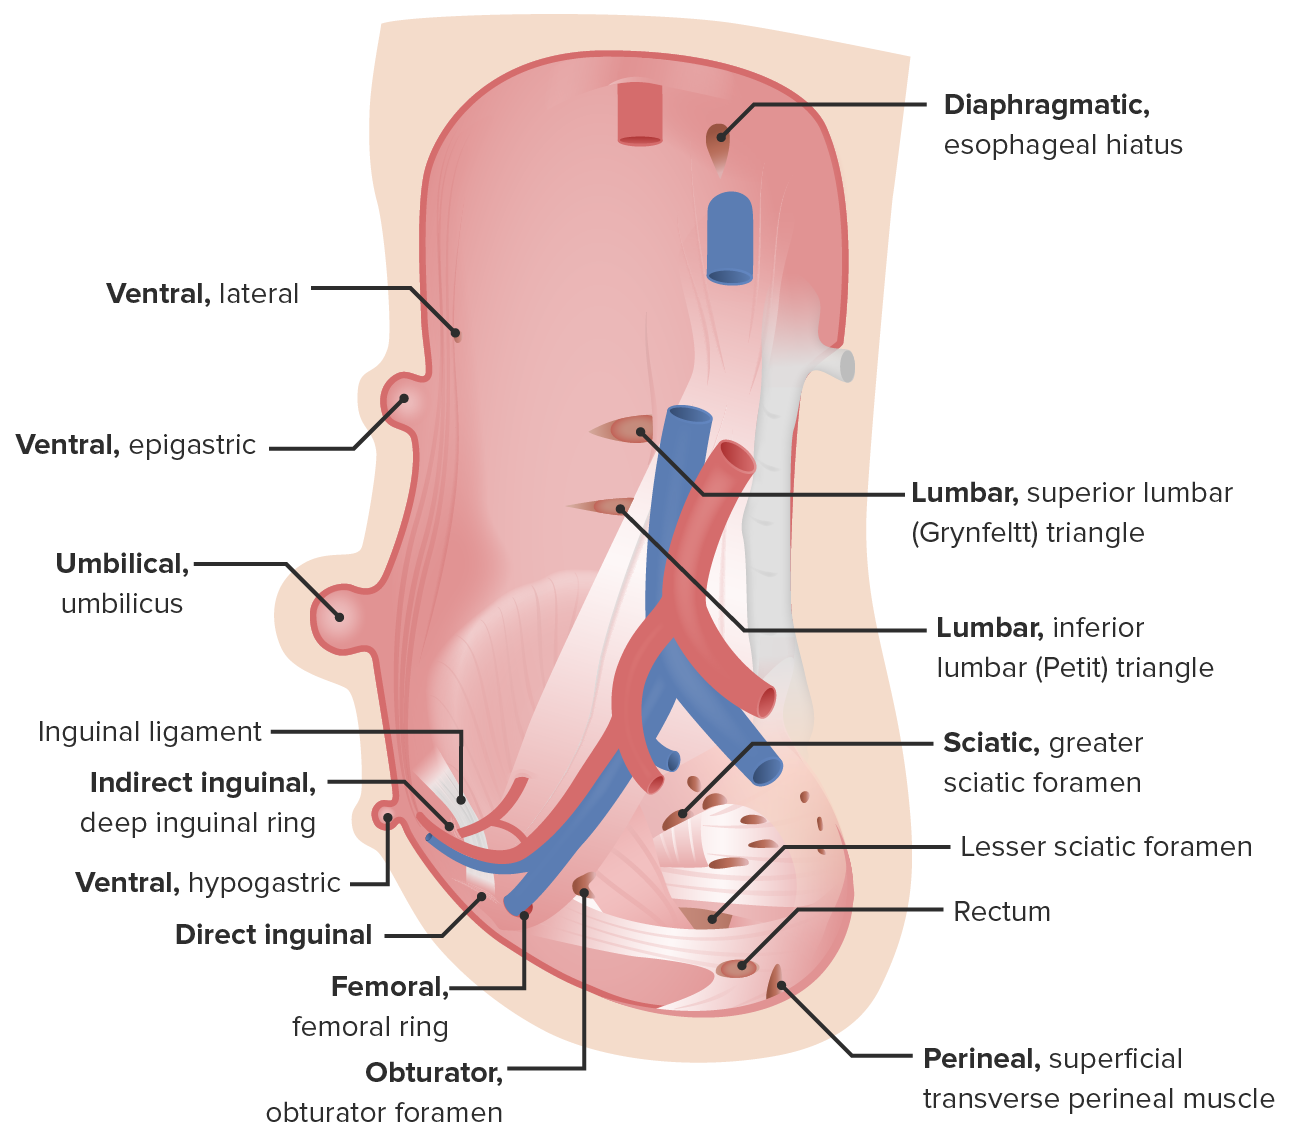 Umbilical and ventral hernia